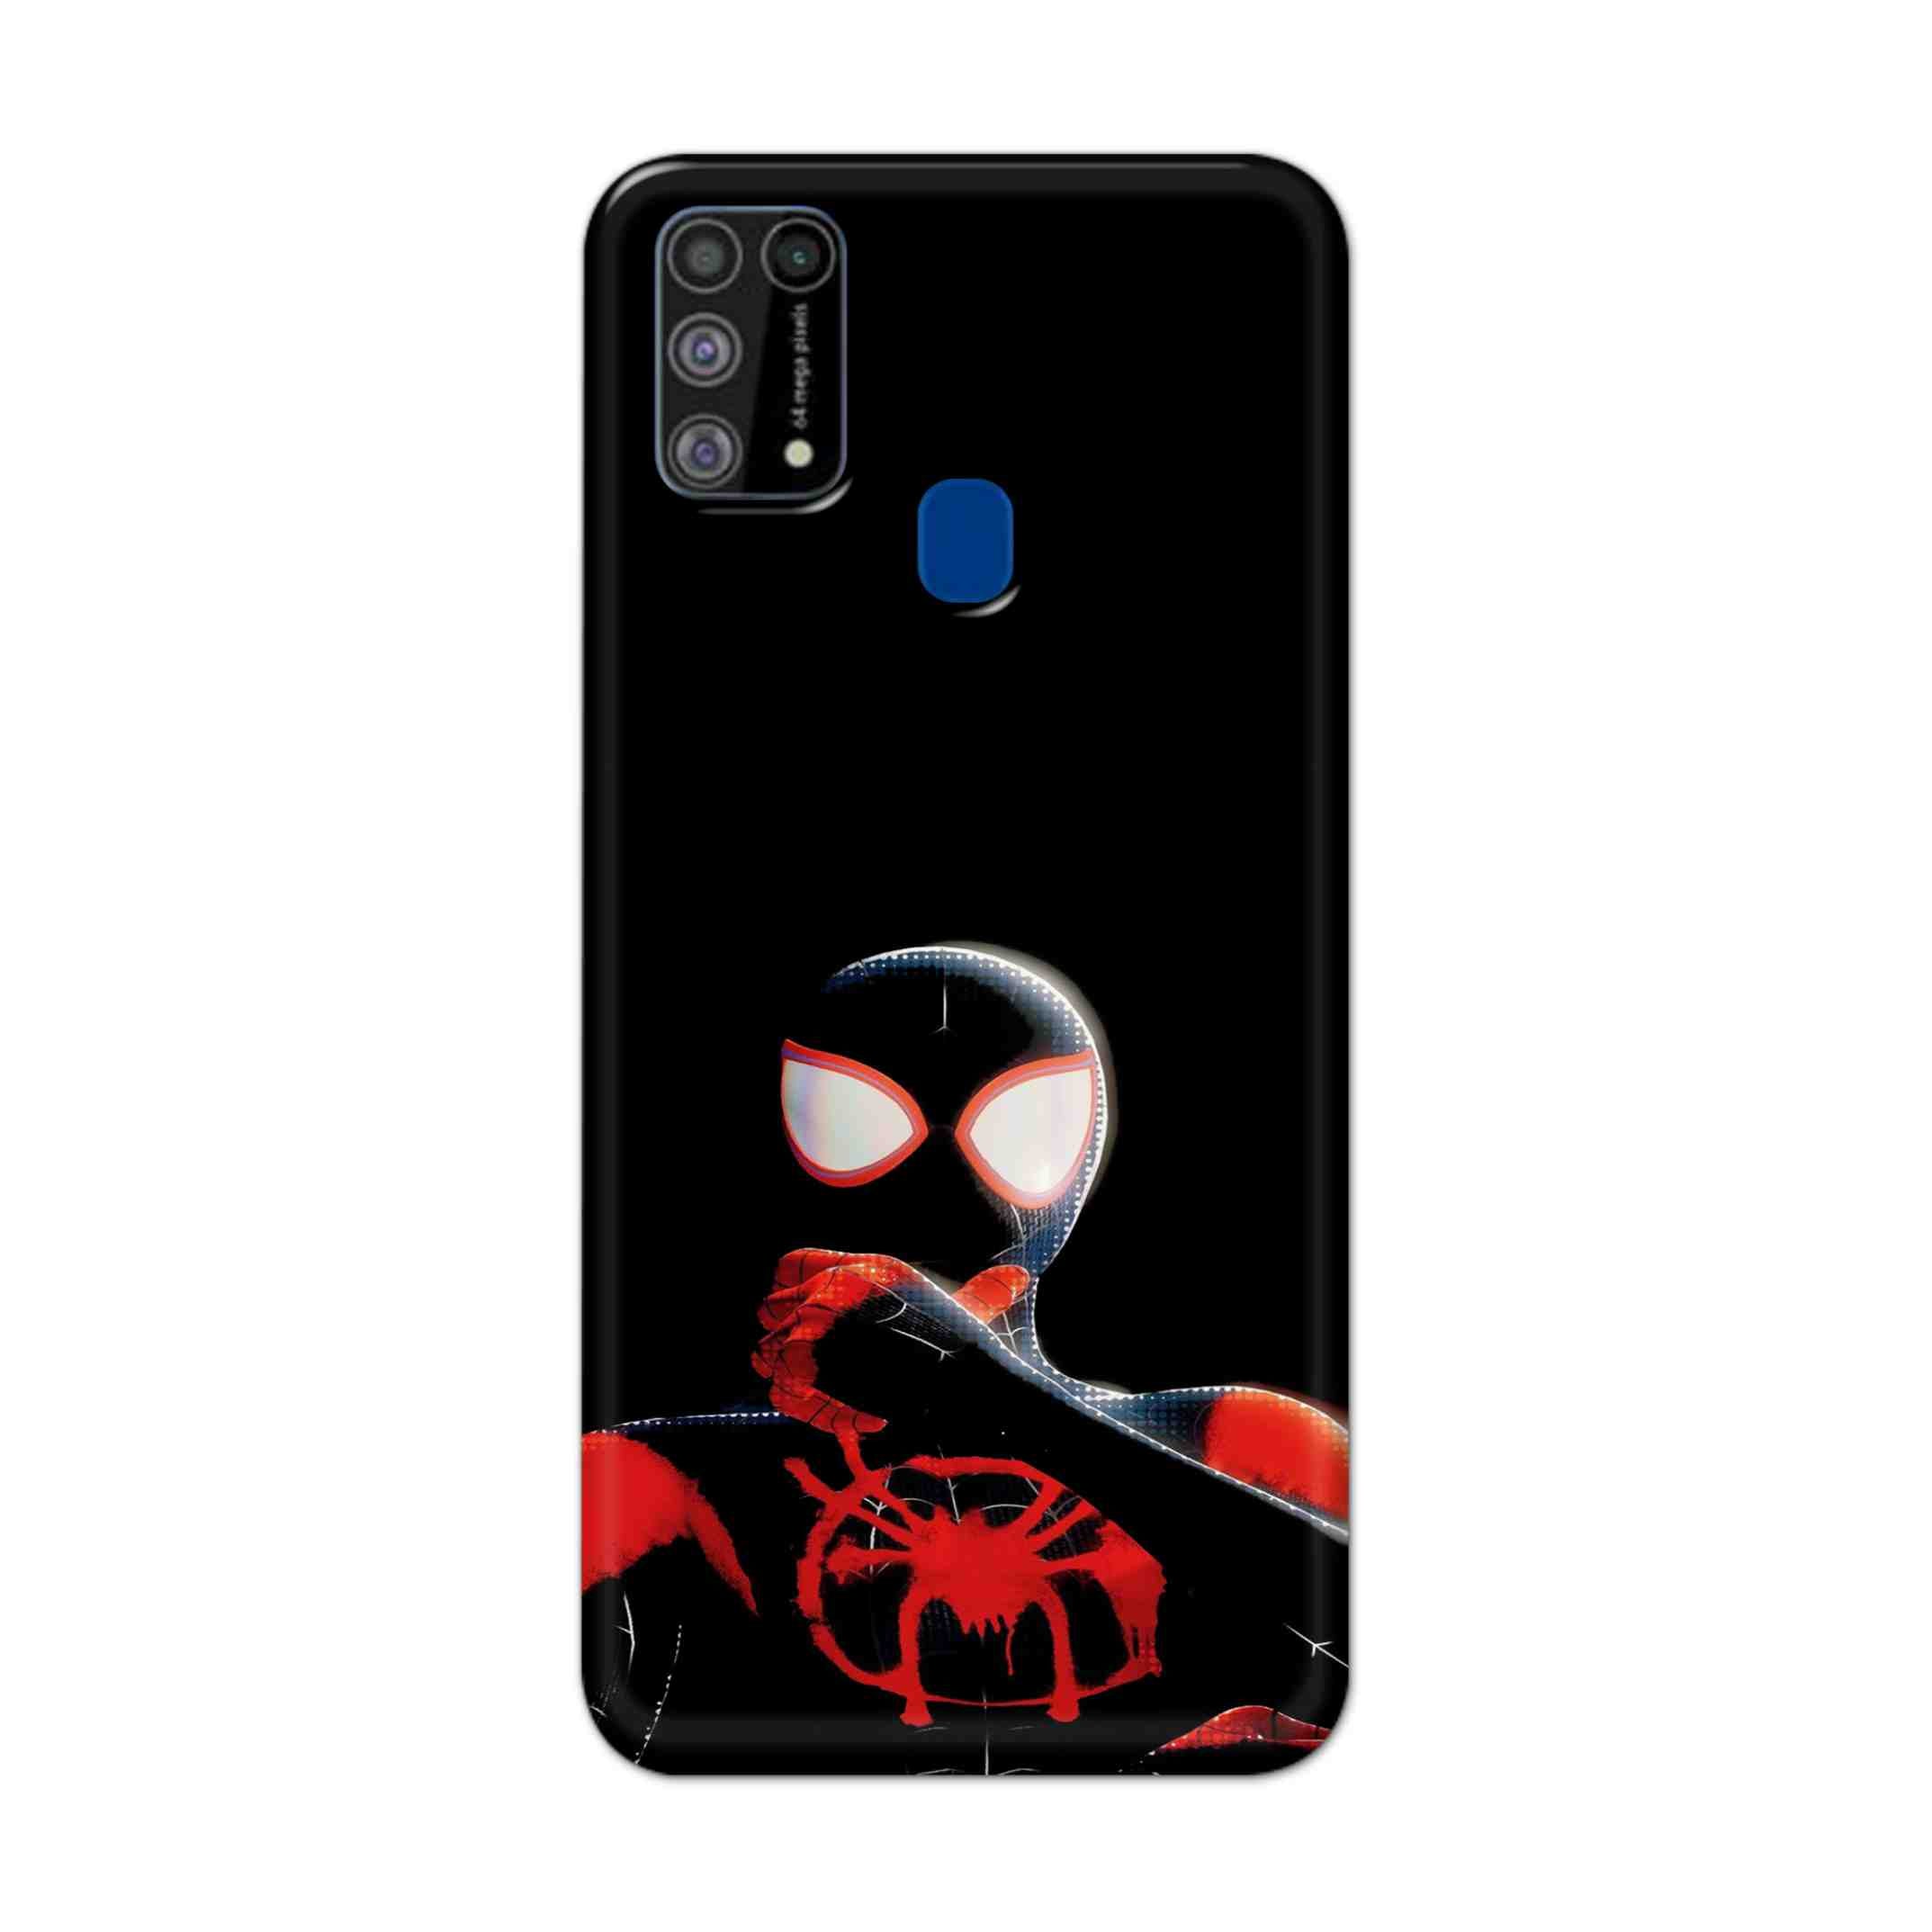 Buy Black Spiderman Hard Back Mobile Phone Case Cover For Samsung Galaxy M31 Online